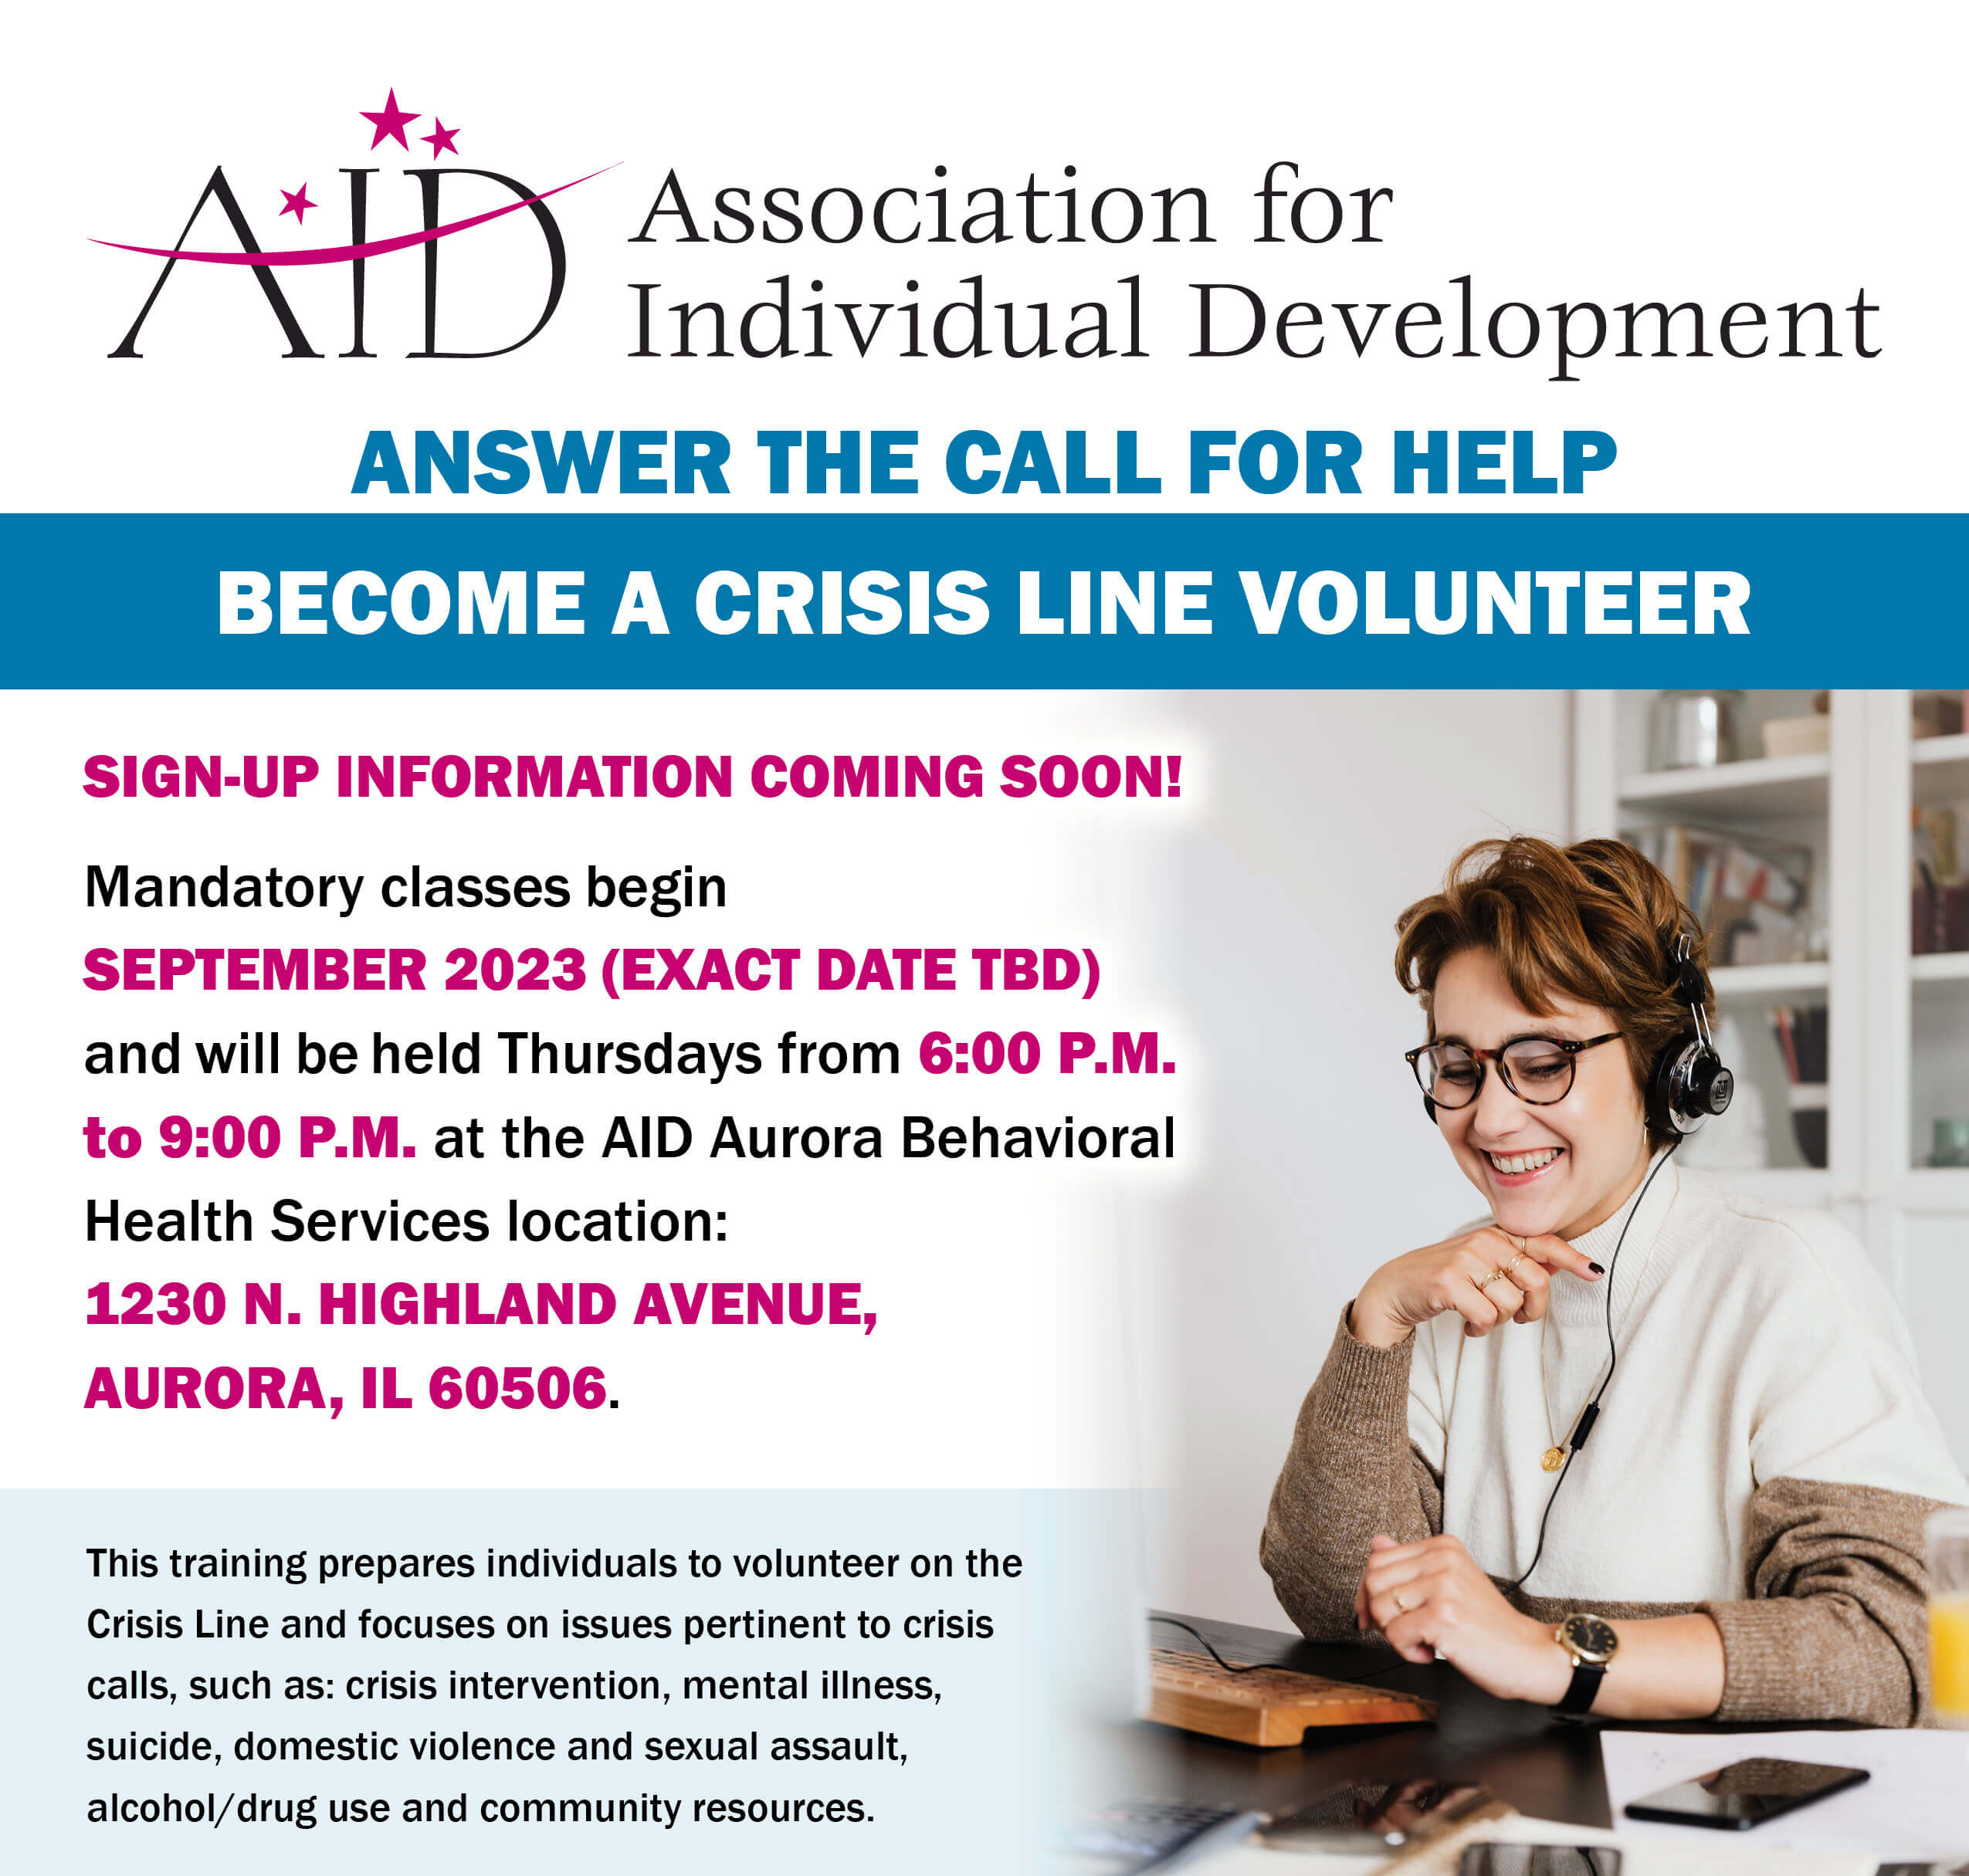 SIGN-UP INFORMATION COMING SOON! Mandatory classes begin SEPTEMBER 2023 (EXACT DATE TBD) and will be held Thursdays from 6:00 P.M. to 9:00 P.M. at the AID Aurora Behavioral Health Services location: 1230 N. HIGHLAND AVENUE, AURORA, IL 60506.